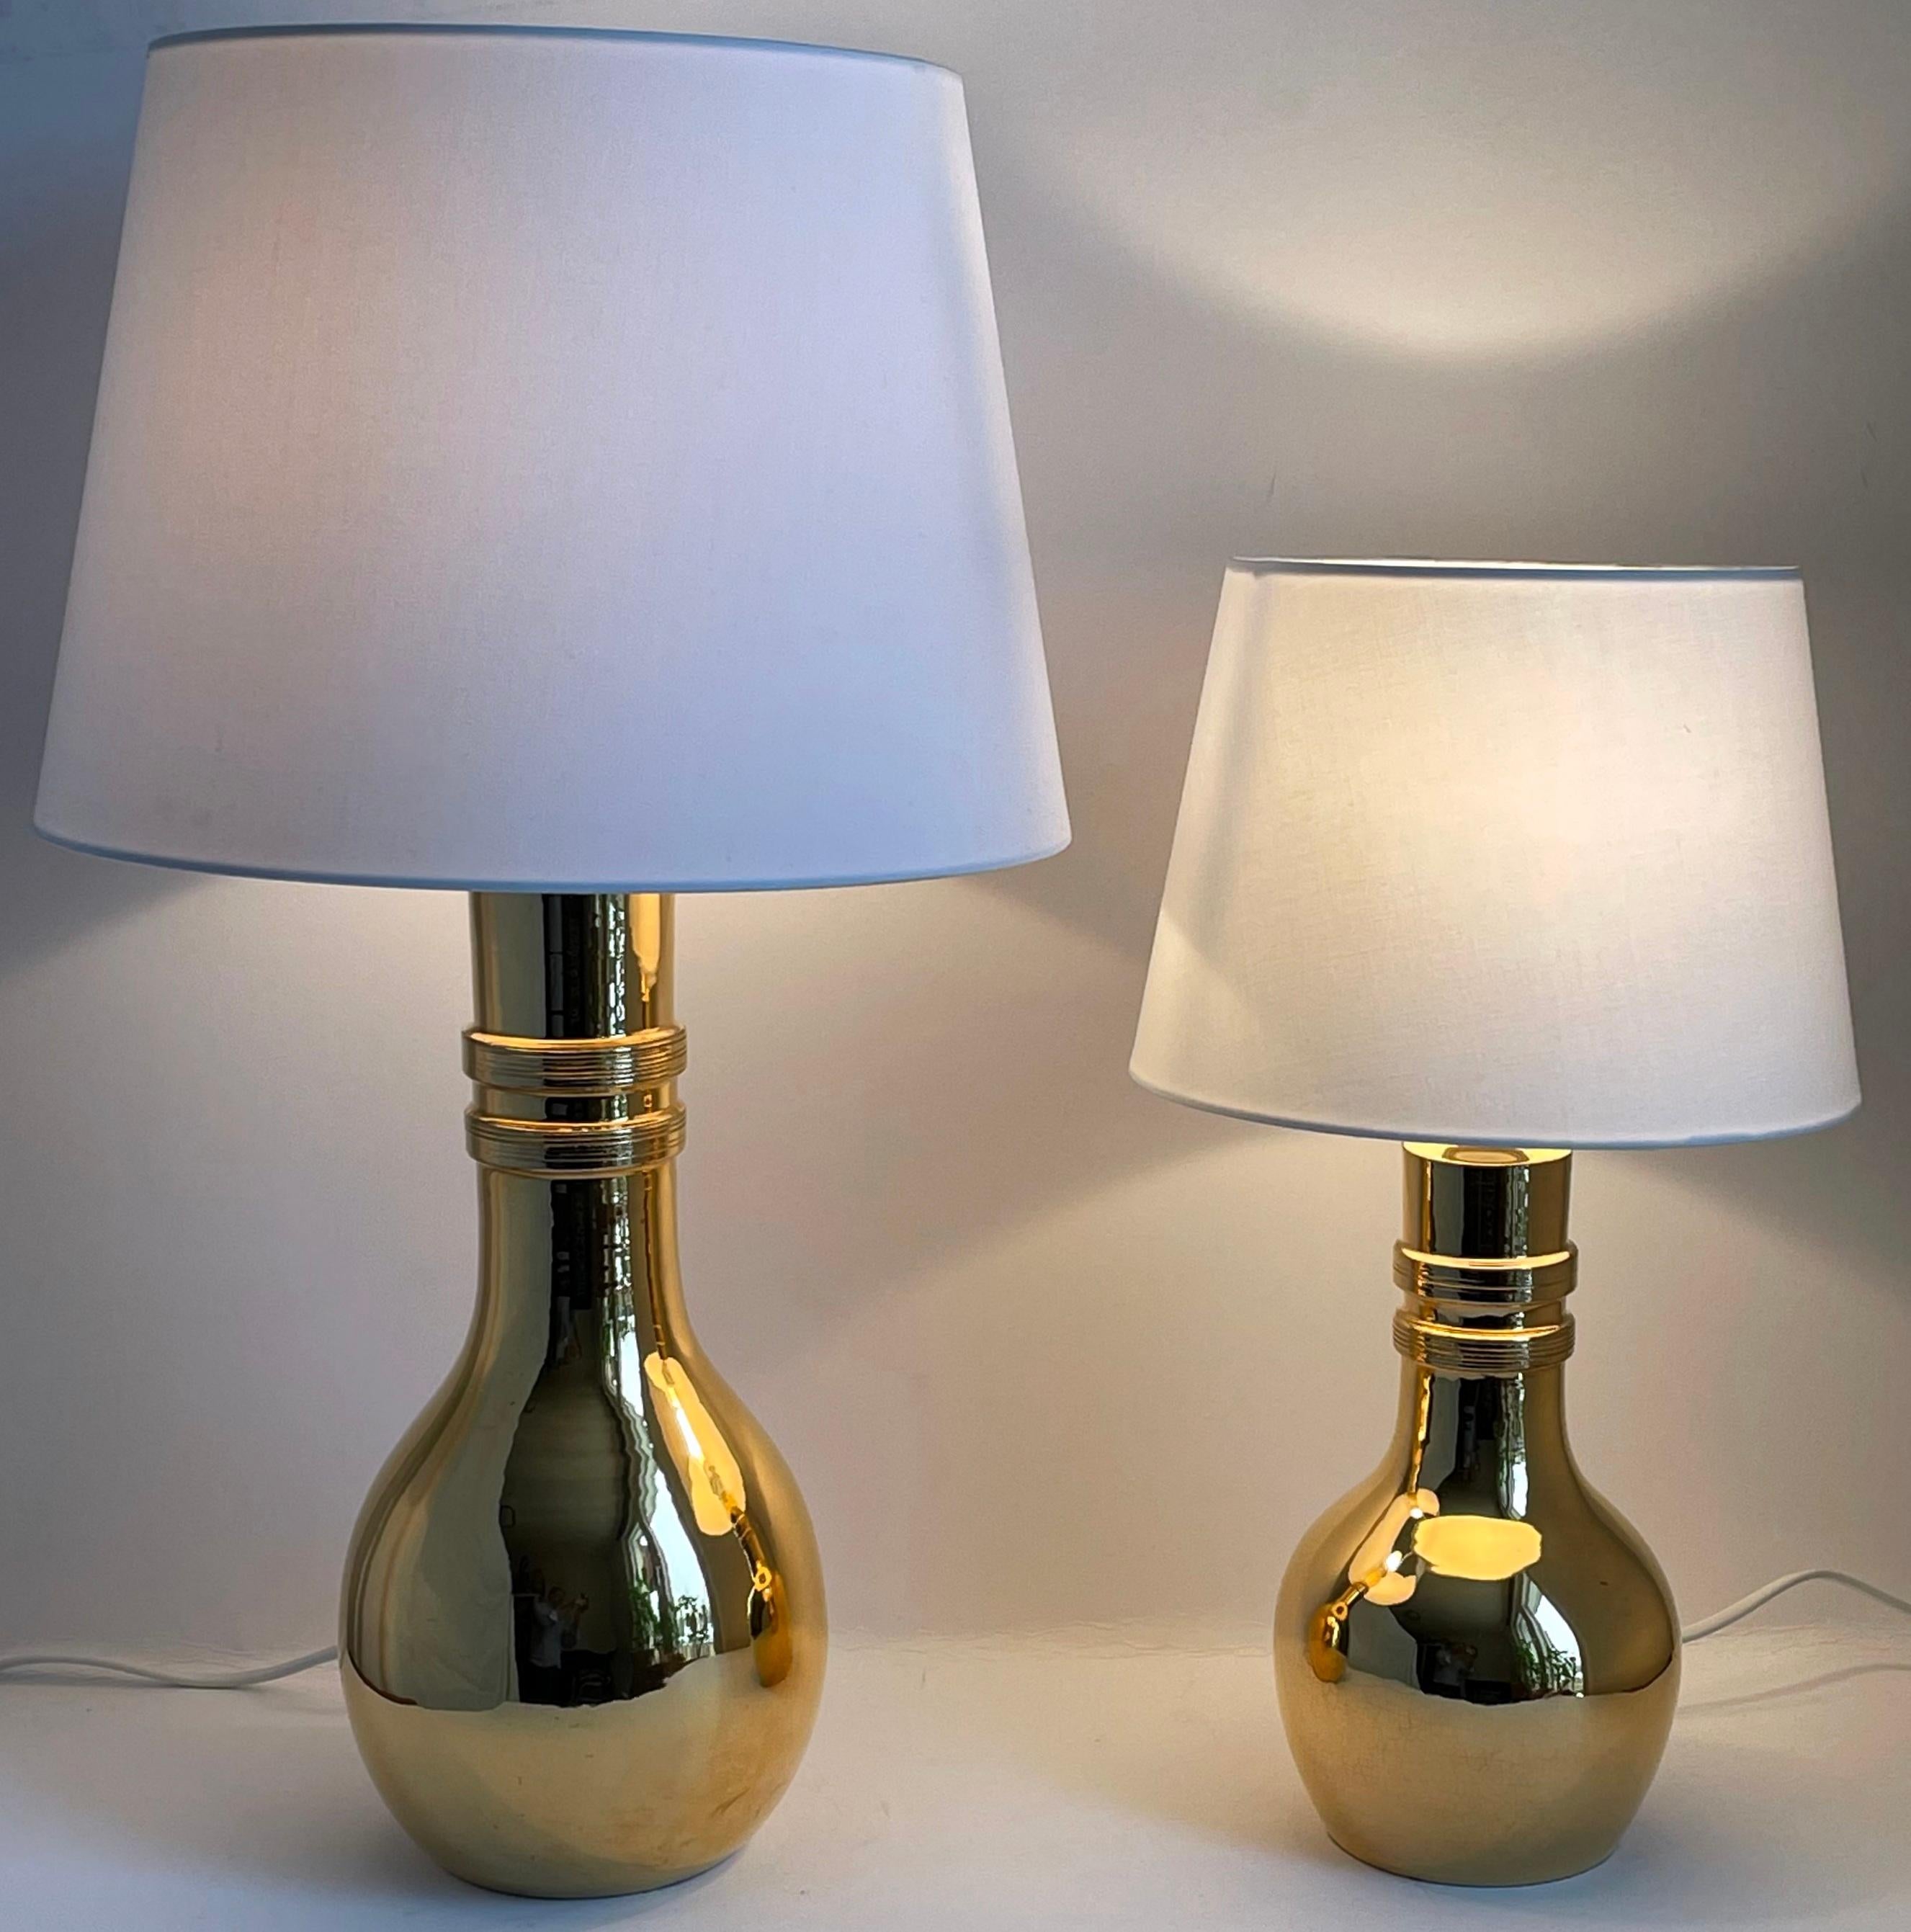 Two Bitossi Table Lamps by Aldo Londi, Gold Glazed Ceramic, Italy, 1970s In Good Condition For Sale In Stockholm, SE